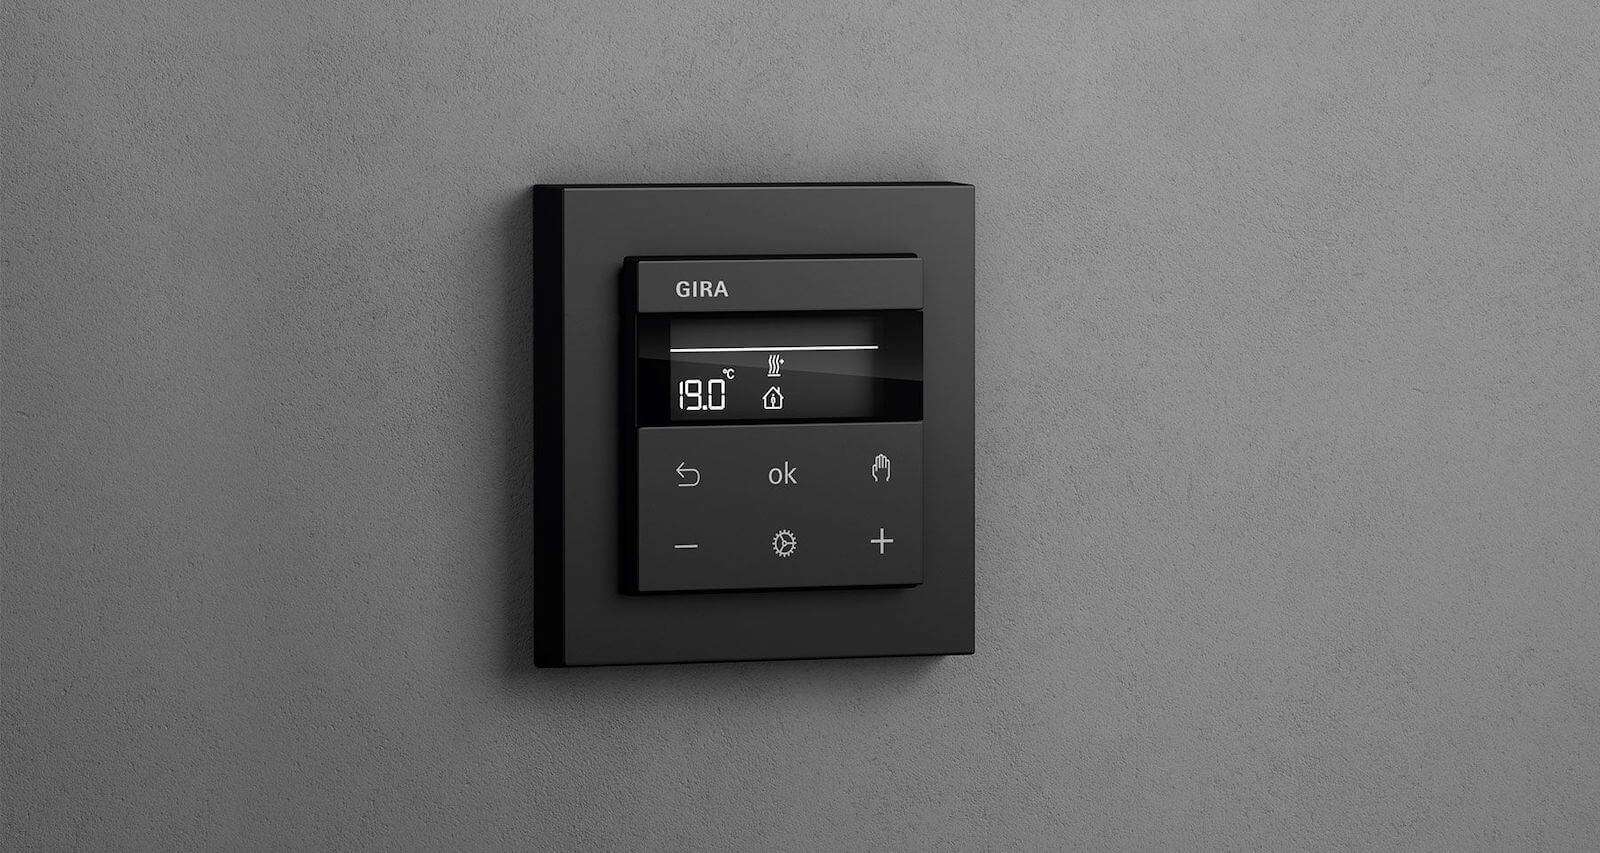 Avail convenient room heating control directly on the Gira System 3000 device or via the System 3000 app.